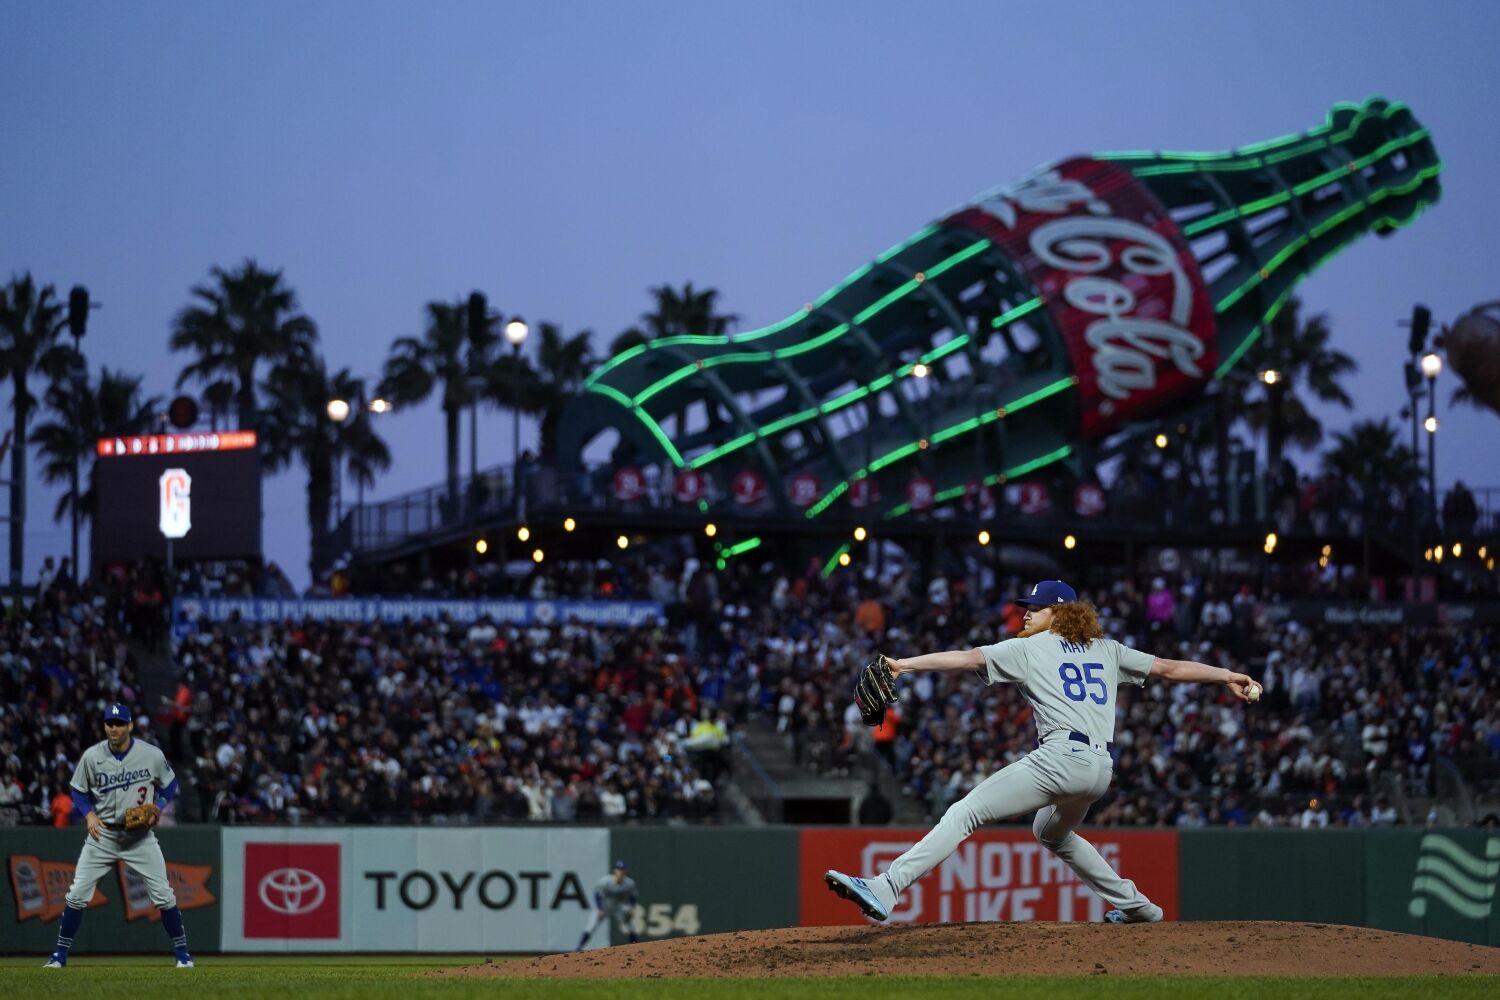 Dodgers-Giants rivalry: Has friendly familiarity replaced icy hostility?